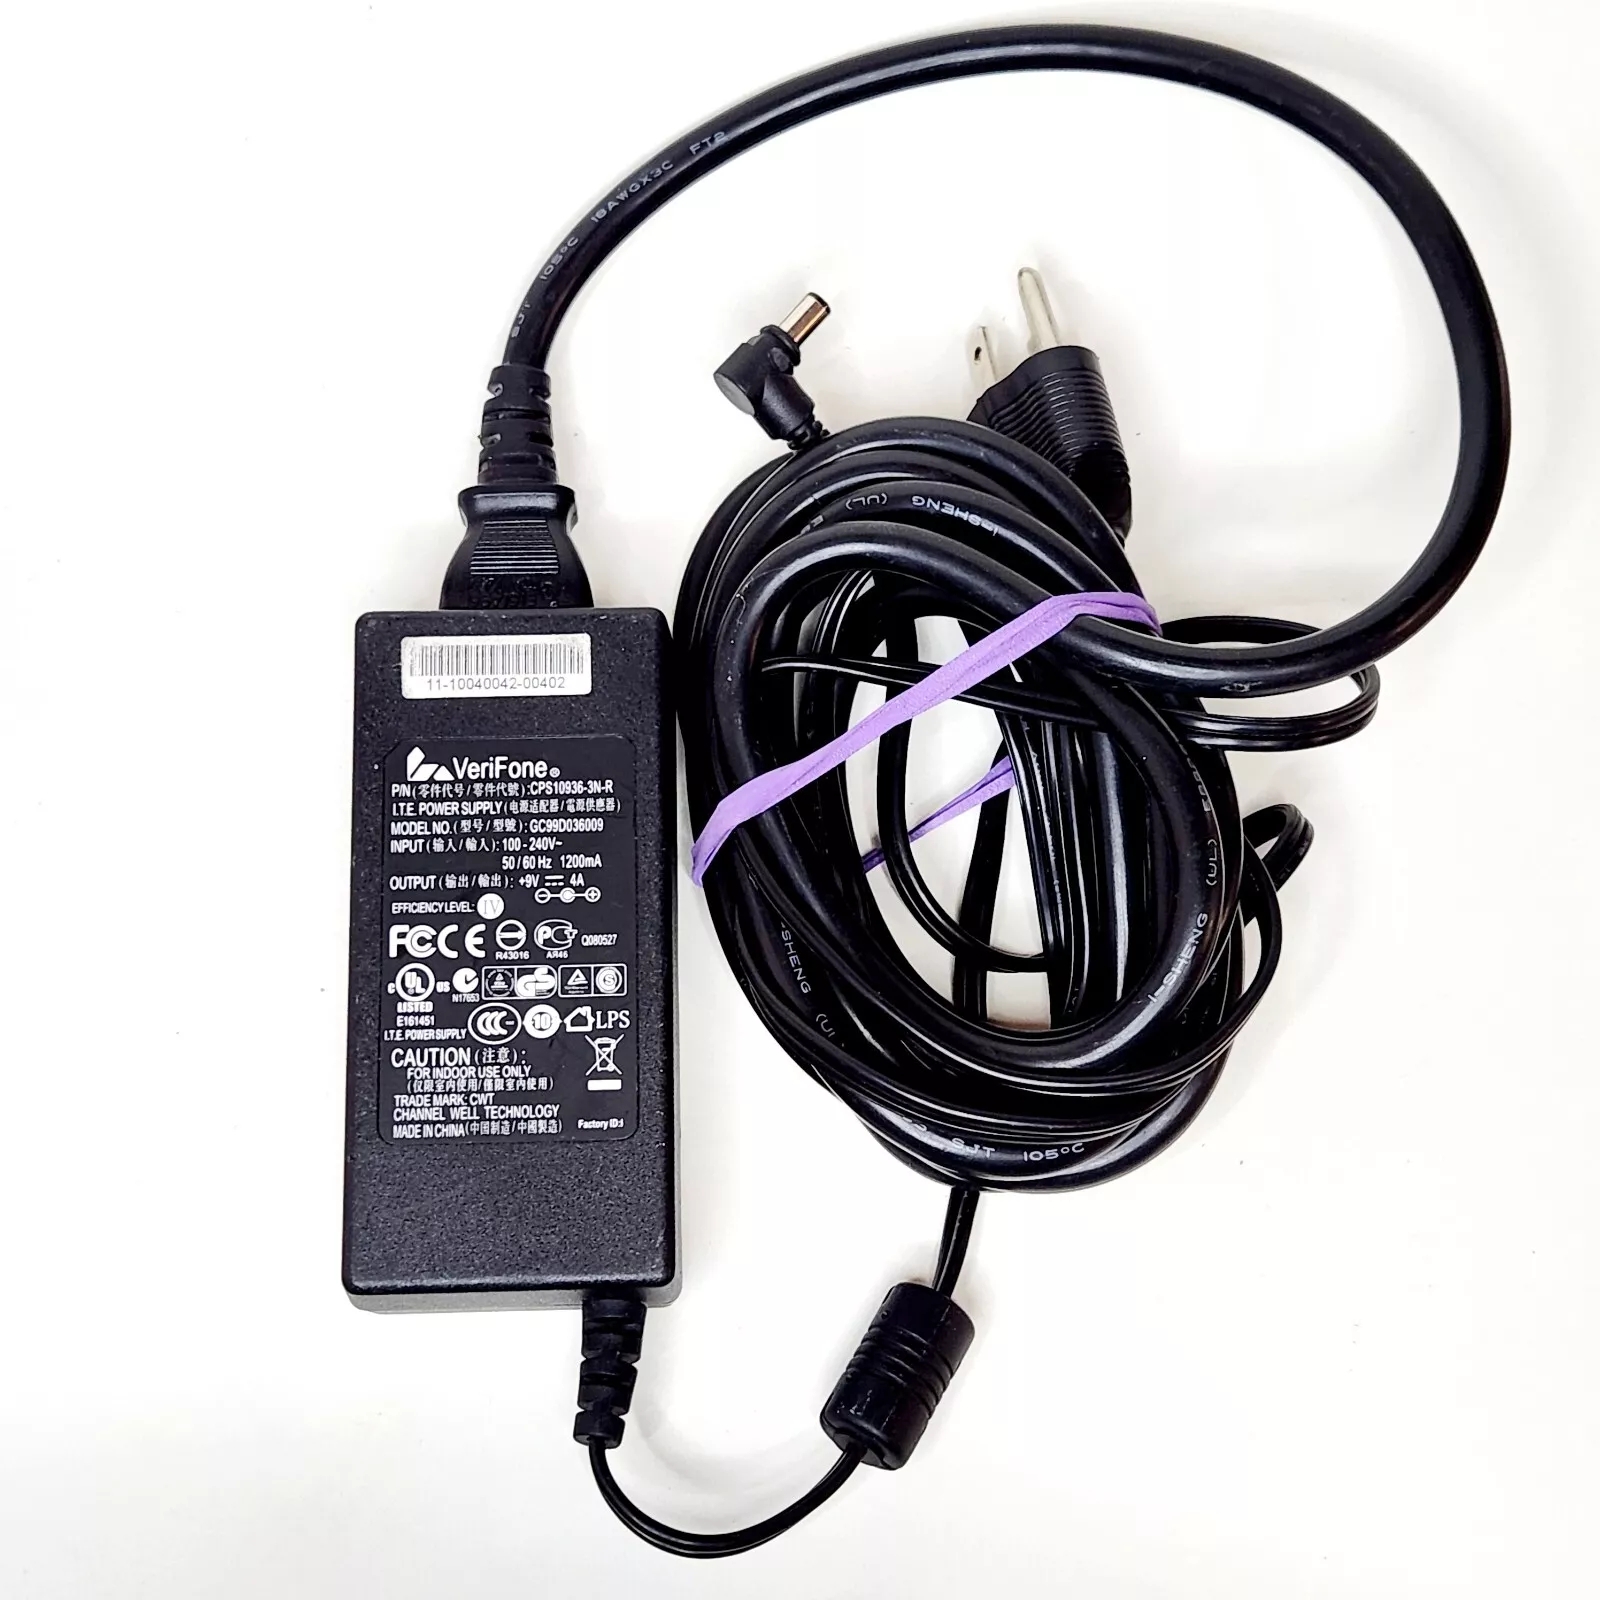 *Brand NEW*Original Genuine VeriFone GC99D036009 9V 4A AC Adapter CPS10936-3N-R with Cord Power Supply